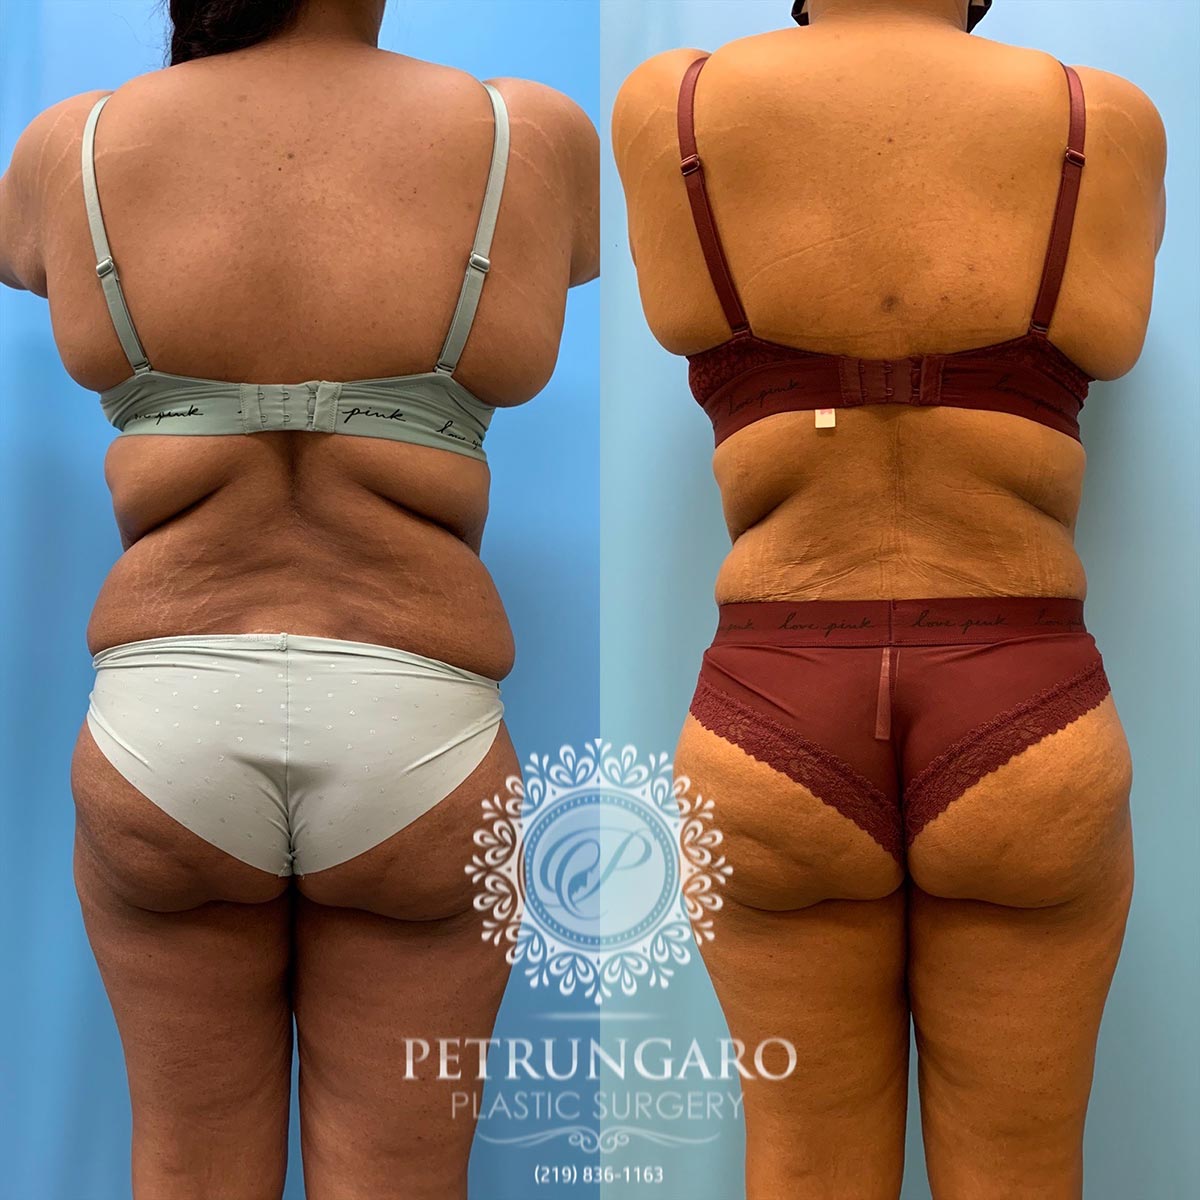 37 year old woman 3 months after tummy tuck with Lipo 360-6